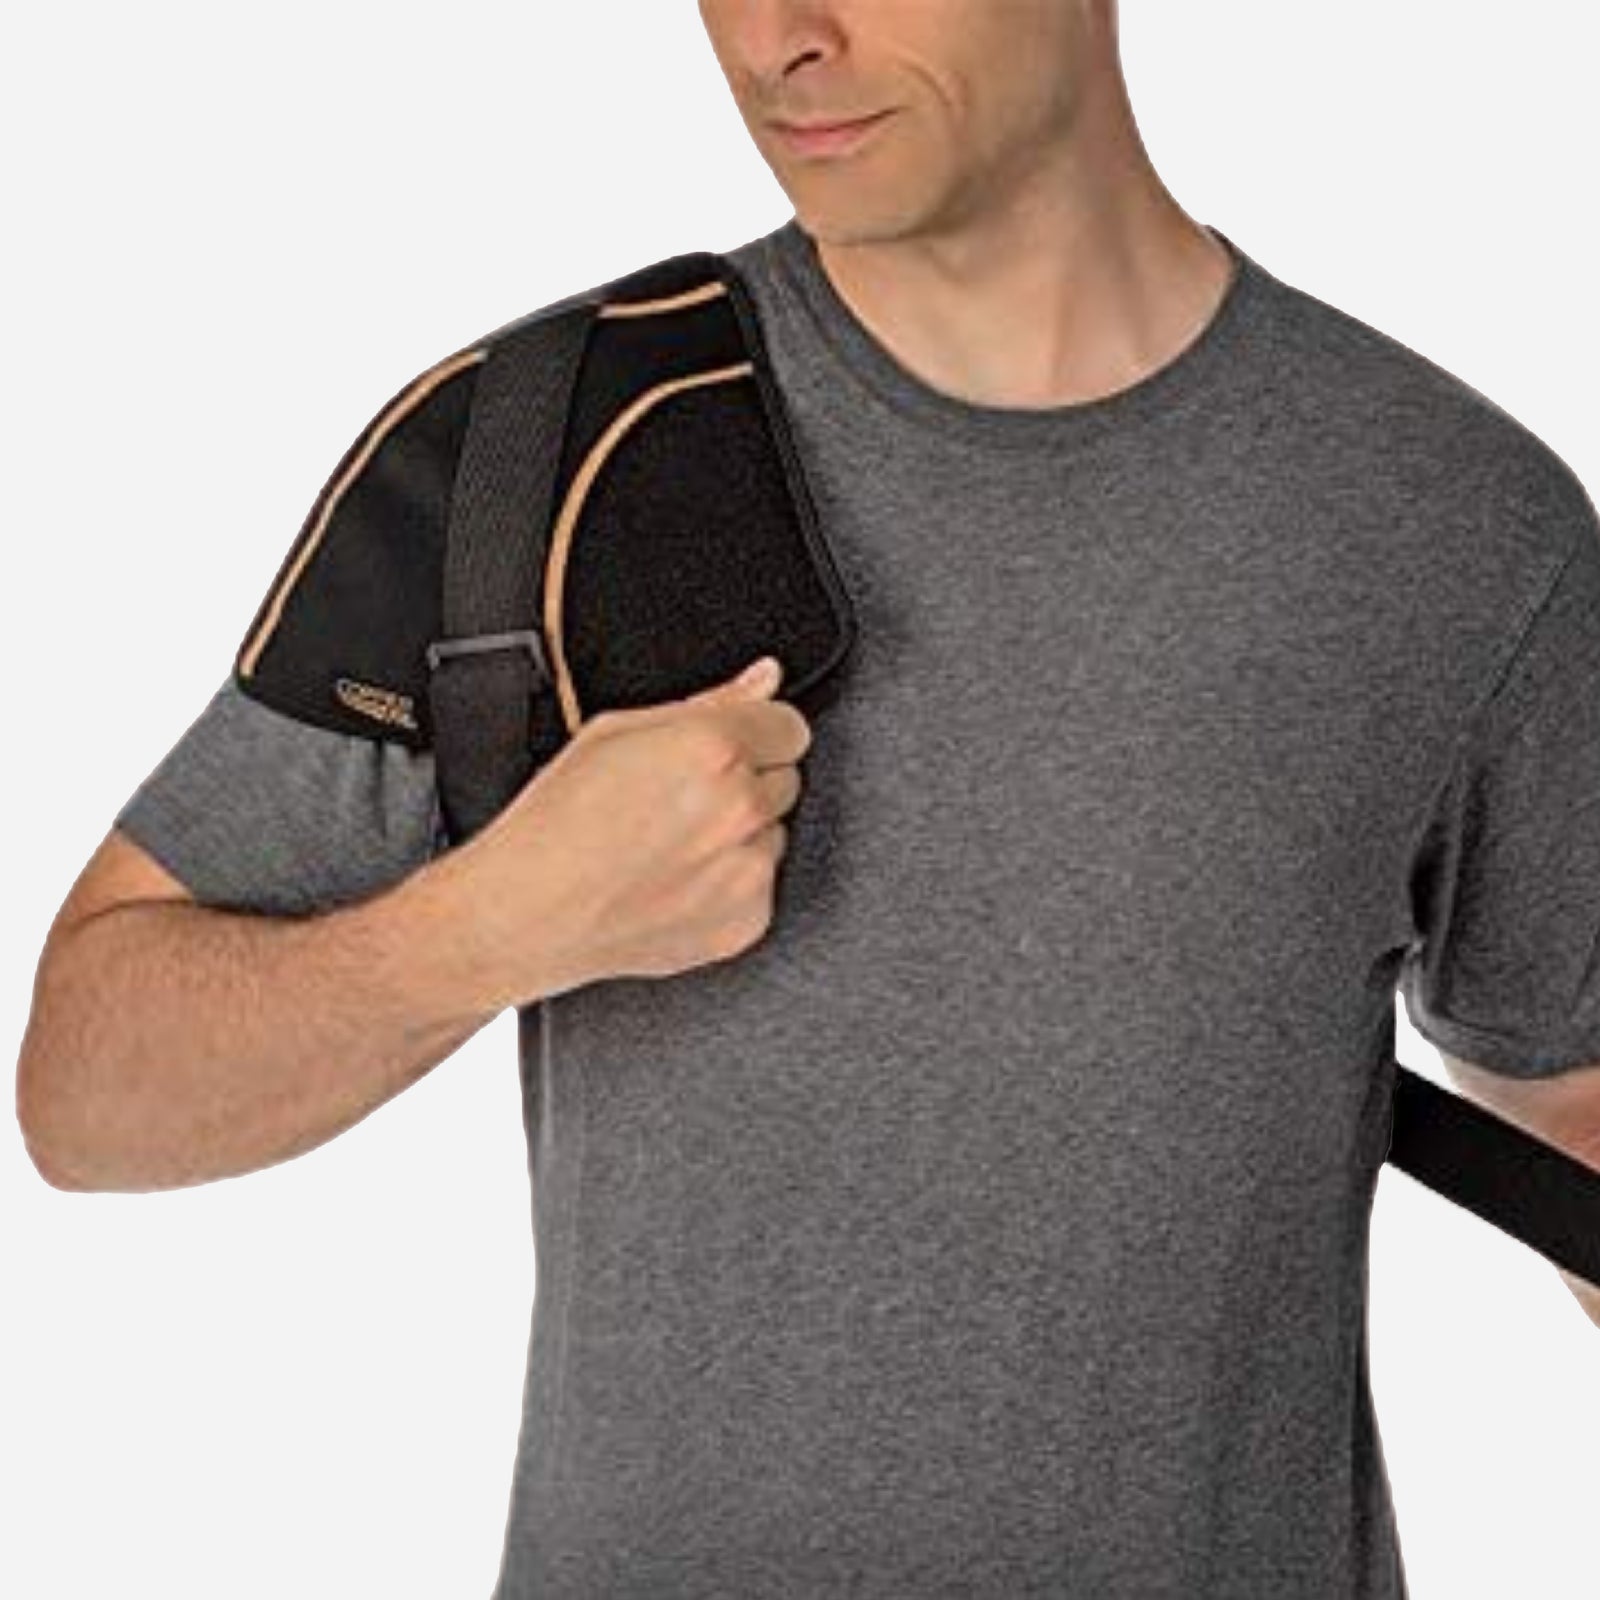 Copper Fit Back Pro Large/XL Back Support Brace - Hall's Hardware and Lumber